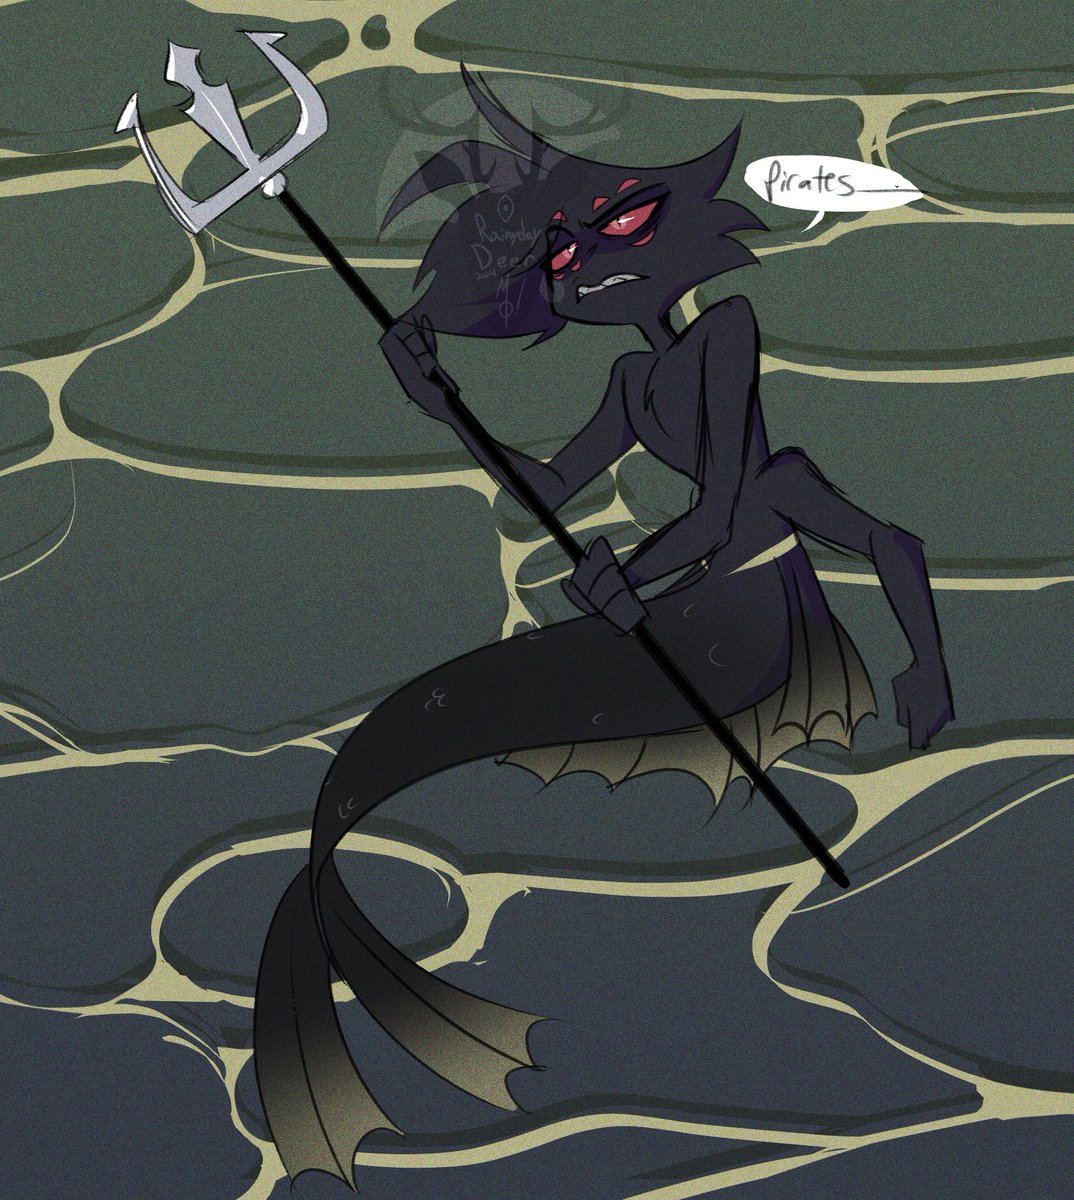 Another MerNiss bc the AU is clingwrap. 
Niss's trident is just a blade; It's not magical.
Niss's family also takes out pirate ships, since pirates catch and sell merfolk-- Which is why he's been scoping out the ship Mo is on.
#arackniss